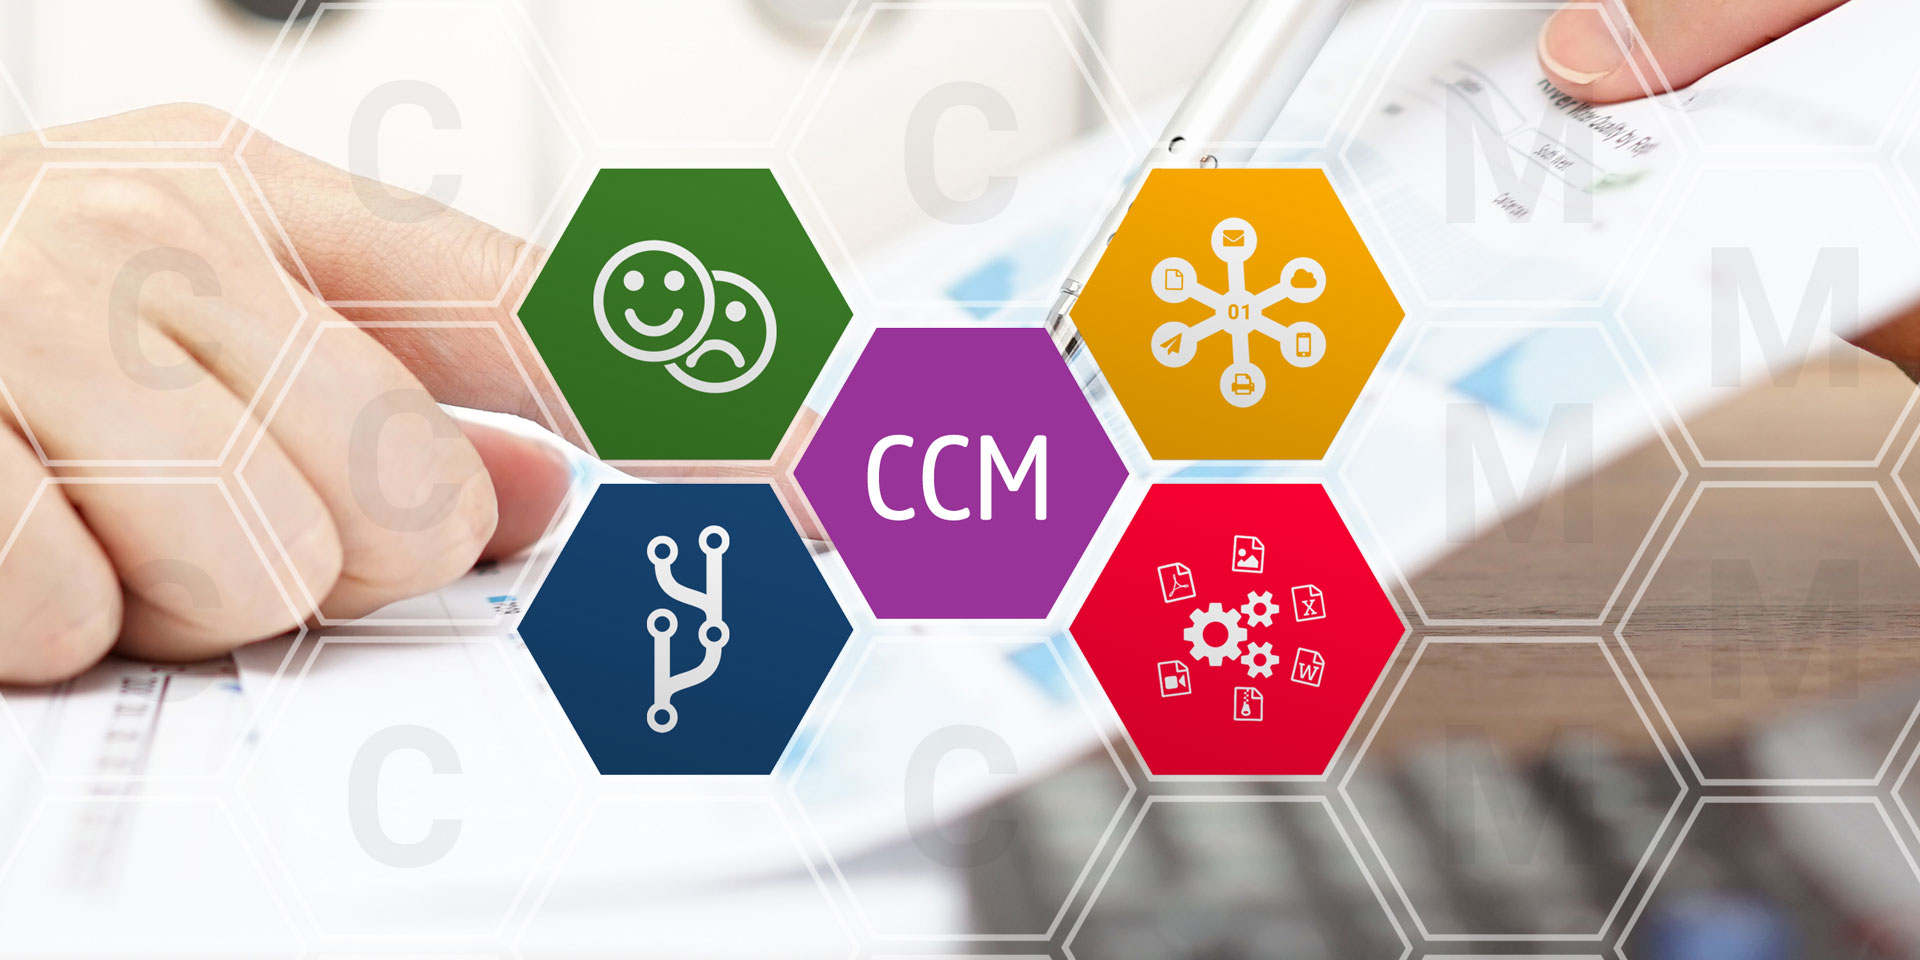 CCM solutions are becoming more common as businesses transition from competing on price and quality to competing on customer service